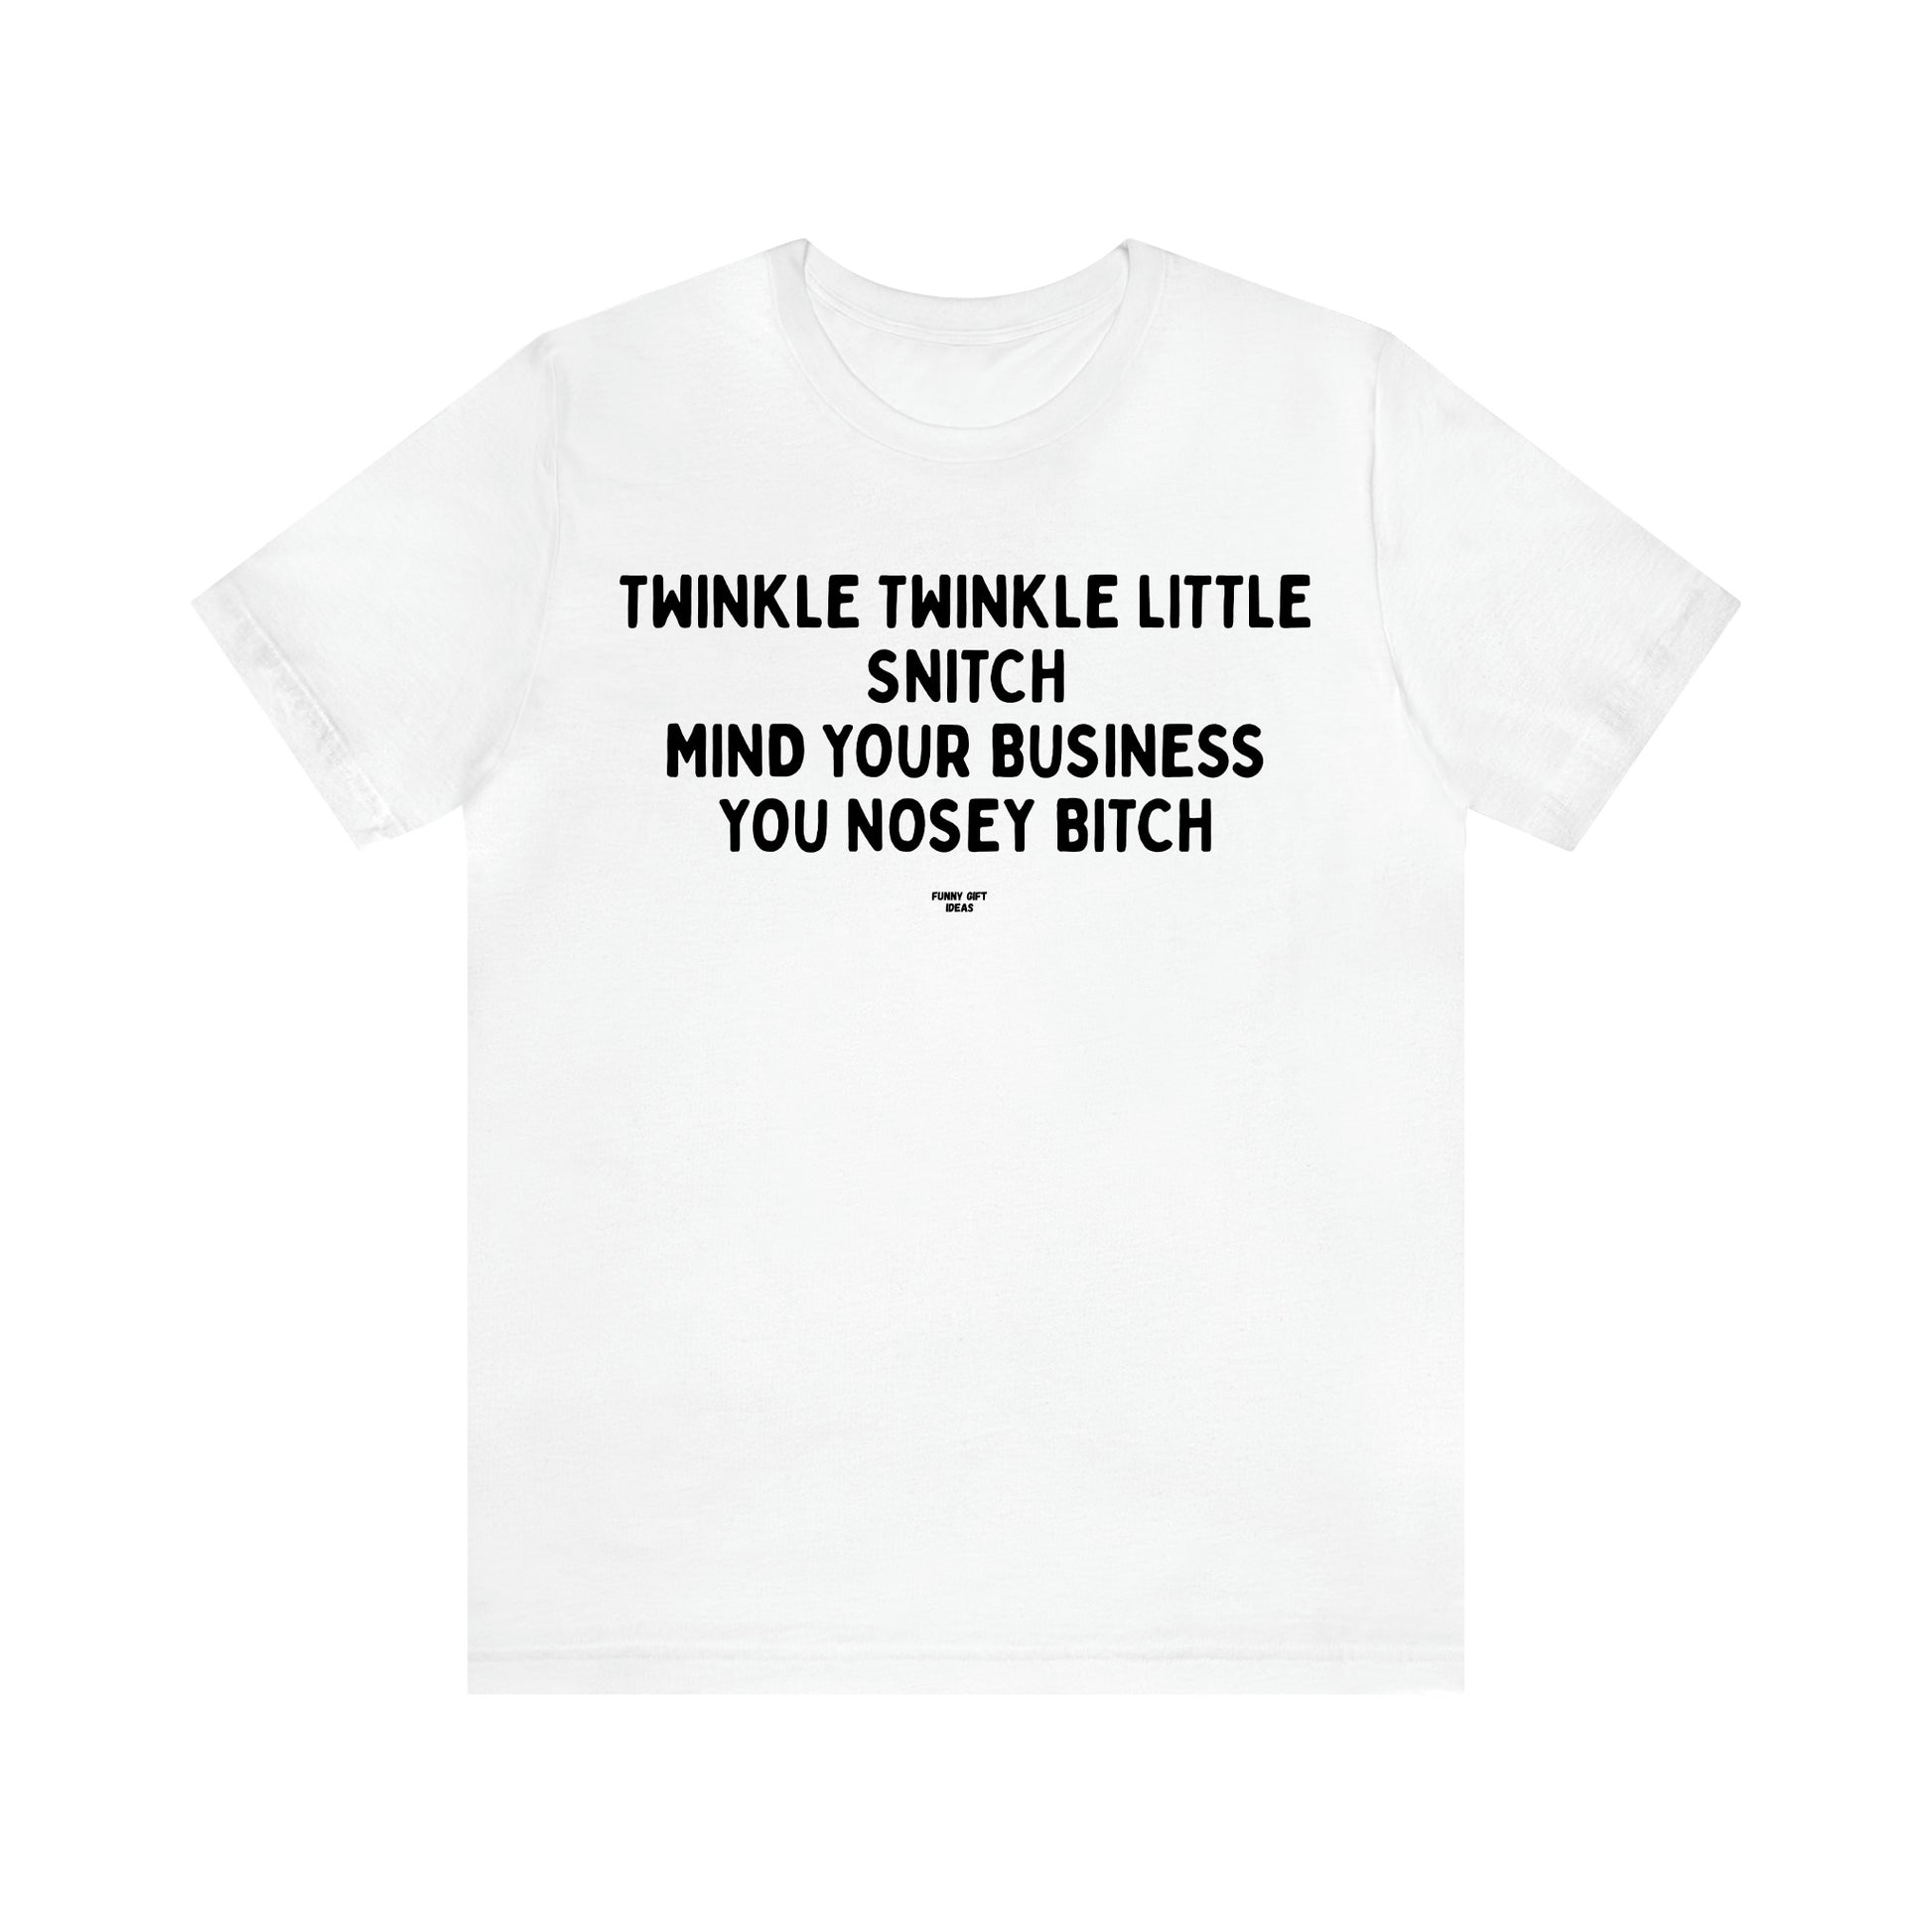 Men's T Shirts Twinkle Twinkle Little Snitch Mind Your Business You Nosey Bitch - Funny Gift Ideas